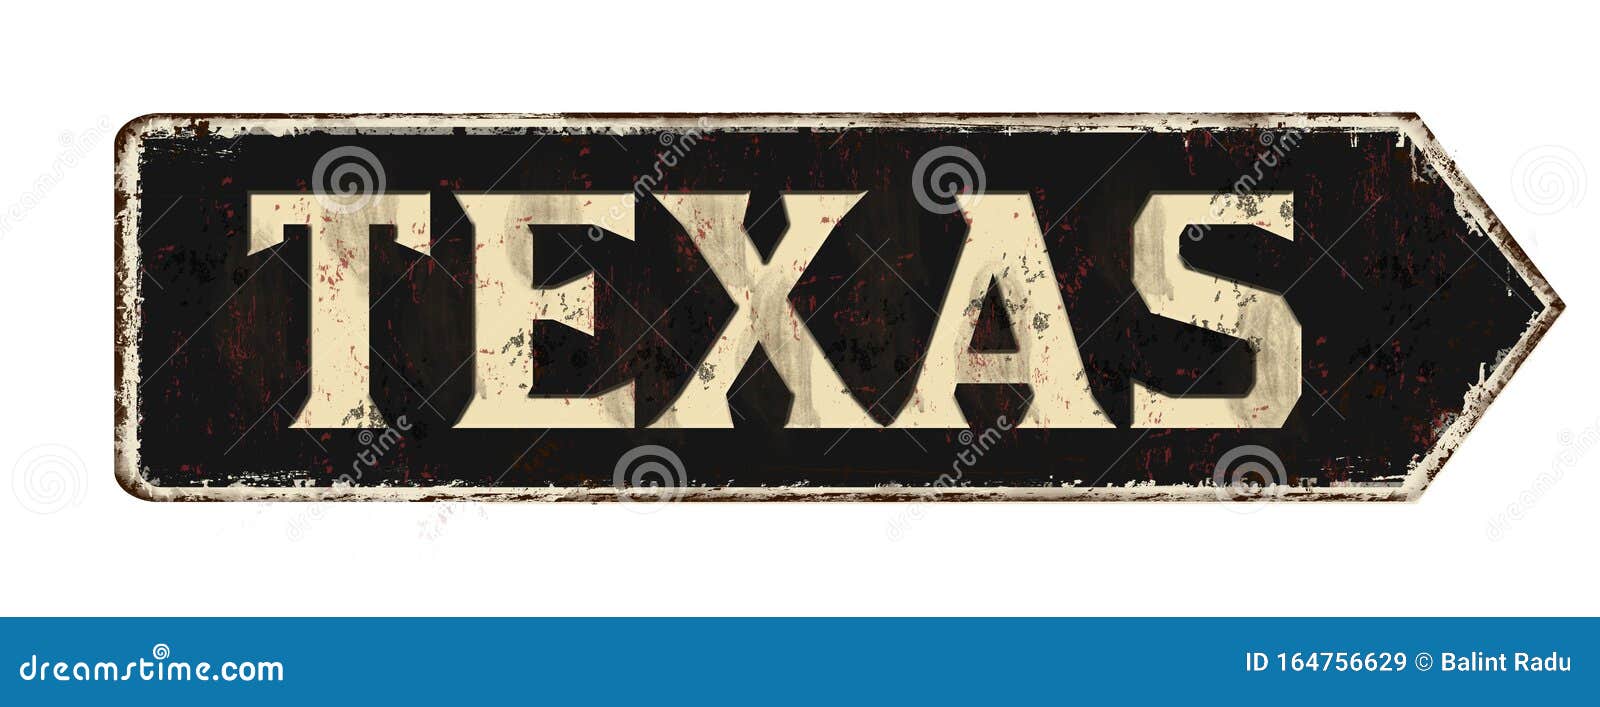 Texas Vintage Rusty Metal Sign Stock Vector - Illustration of fashioned